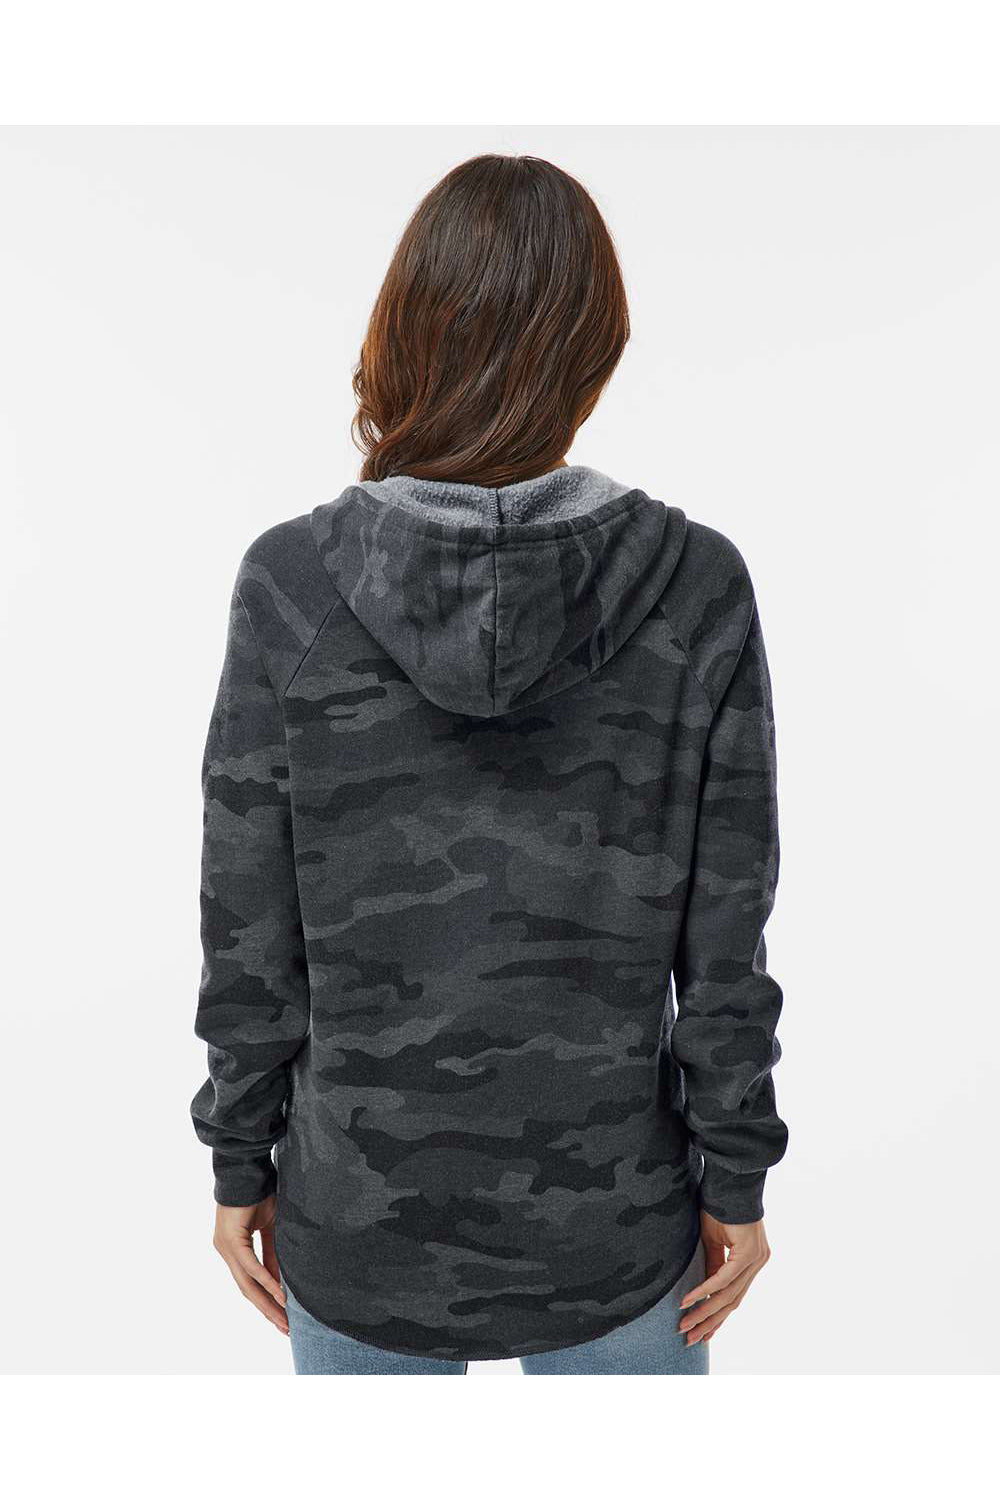 Independent Trading Co. PRM2500 Womens California Wave Wash Hooded Sweatshirt Hoodie Heather Black Camo Model Back